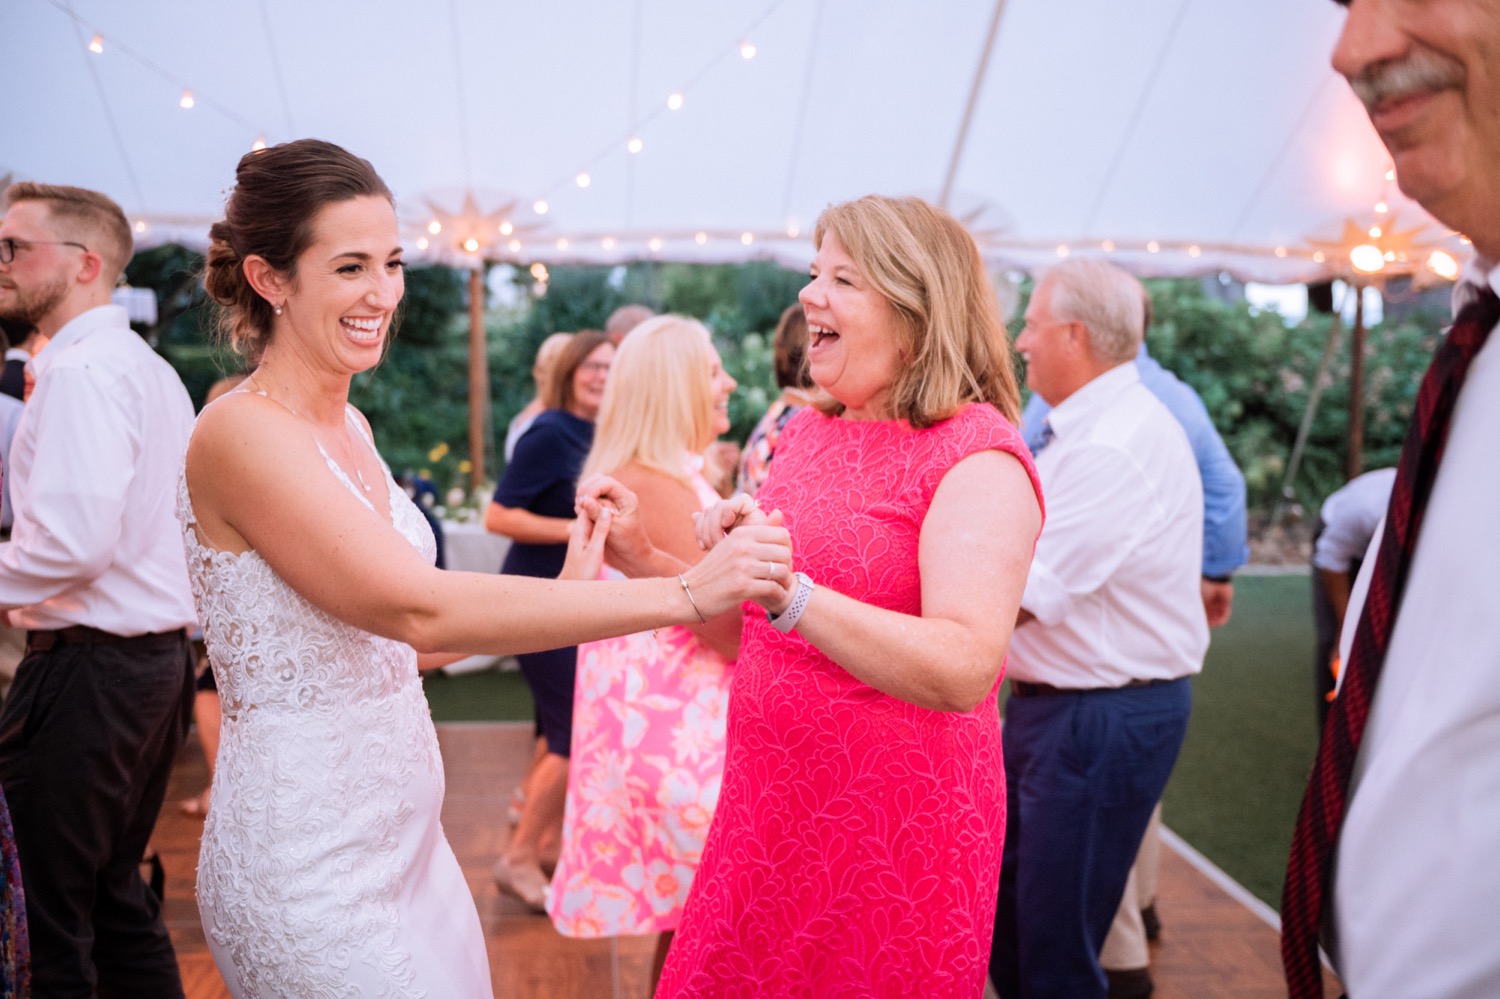 bride dancing with a guest at her wedding reception